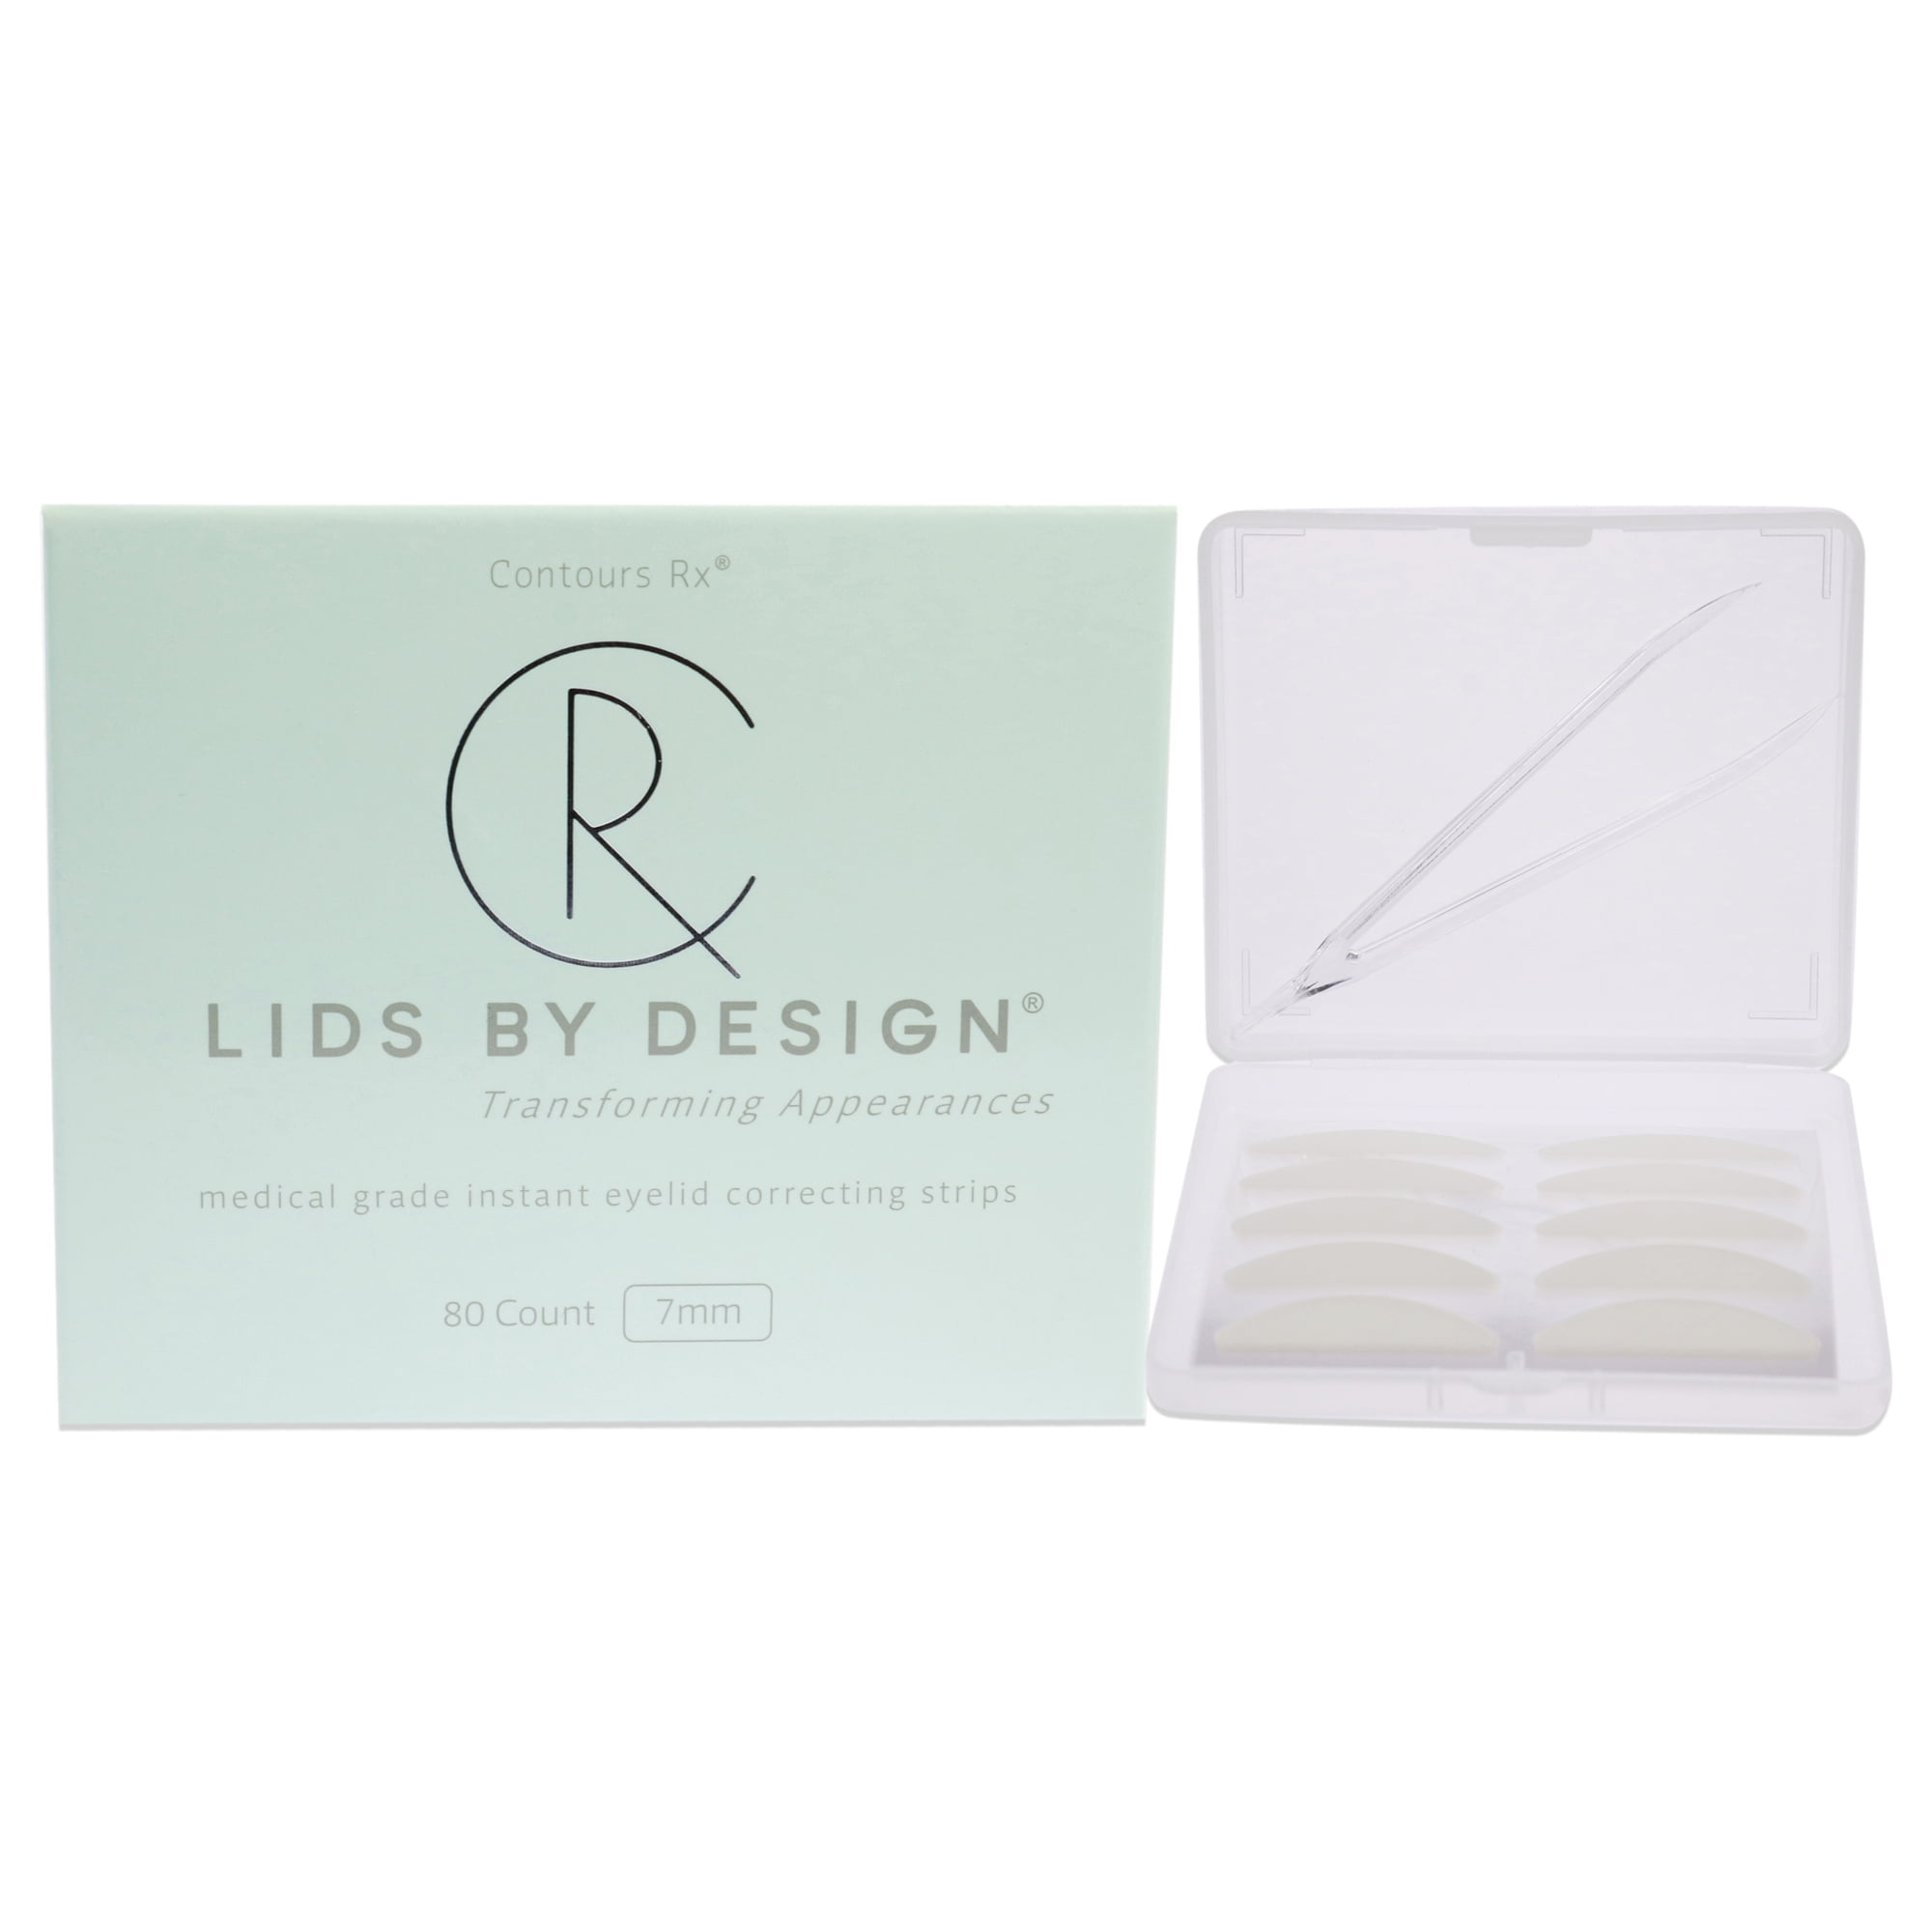 Contours Rx Lids by Design Eyelid Lift Strips - (3mm) Eye Lift without –  TweezerCo